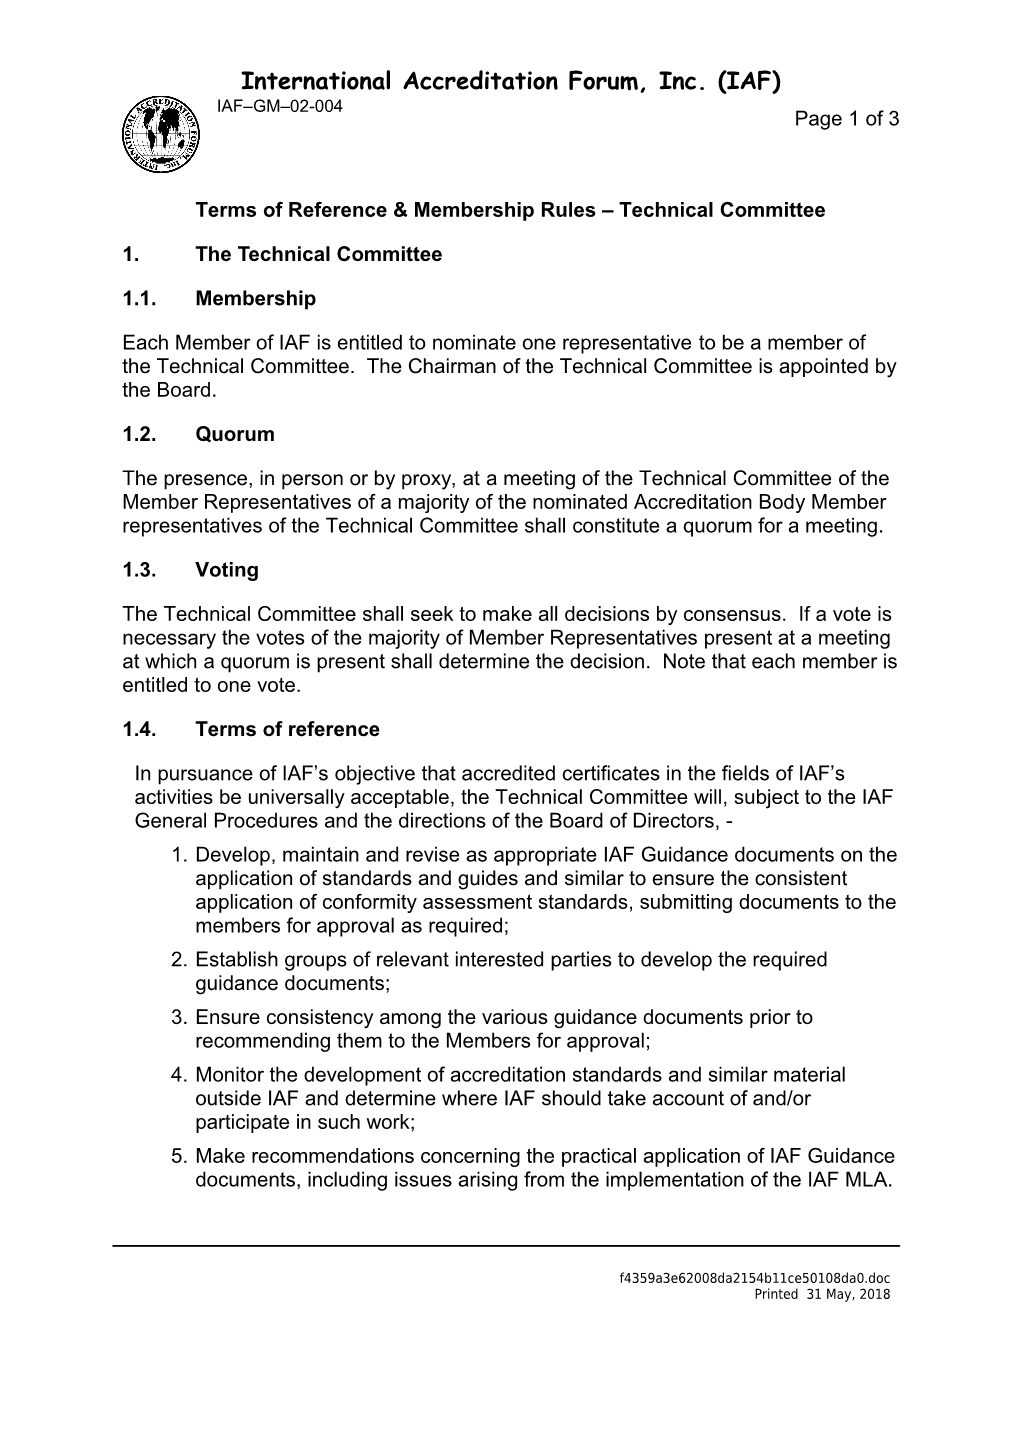 Terms of Reference & Membership Rules Technical Committee